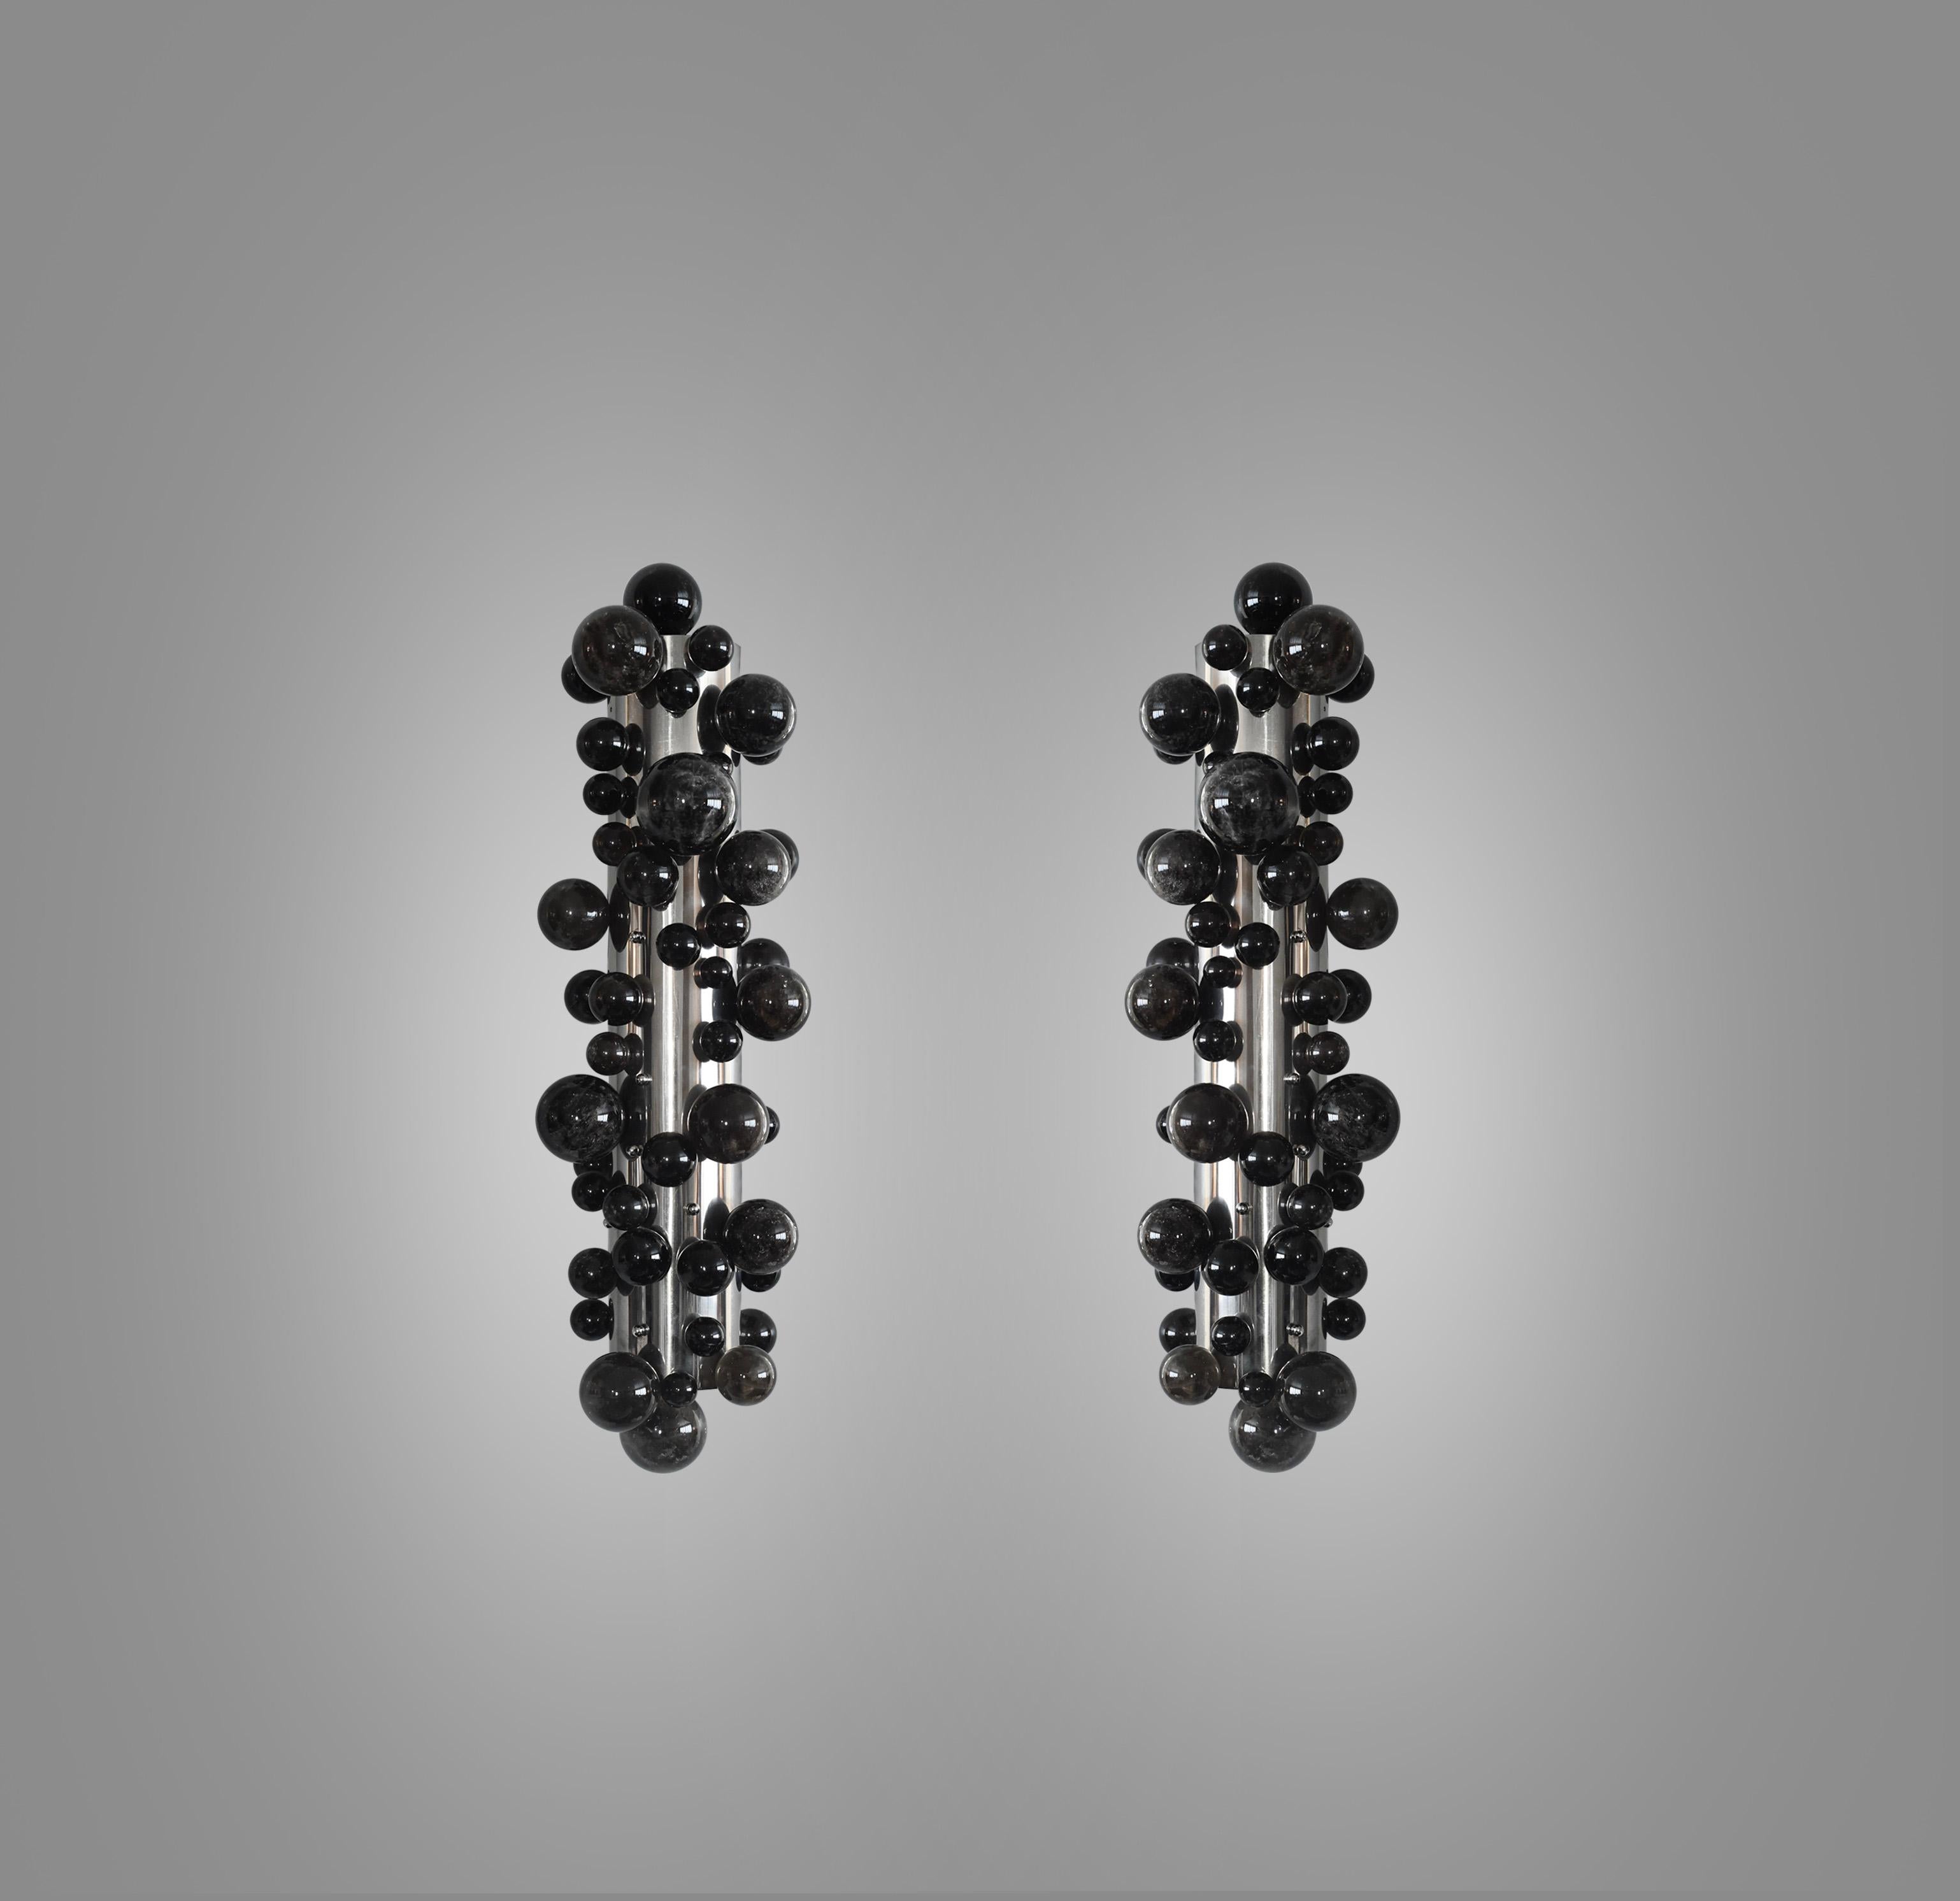 Pair of dark bubble rock crystal sconces with the nickel plating finishes. Created by Phoenix gallery NYC.
Each sconce installed four sockets. Use four 60w LED warm light bulbs. Total 240w max. Light bulbs included.
Custom size upon